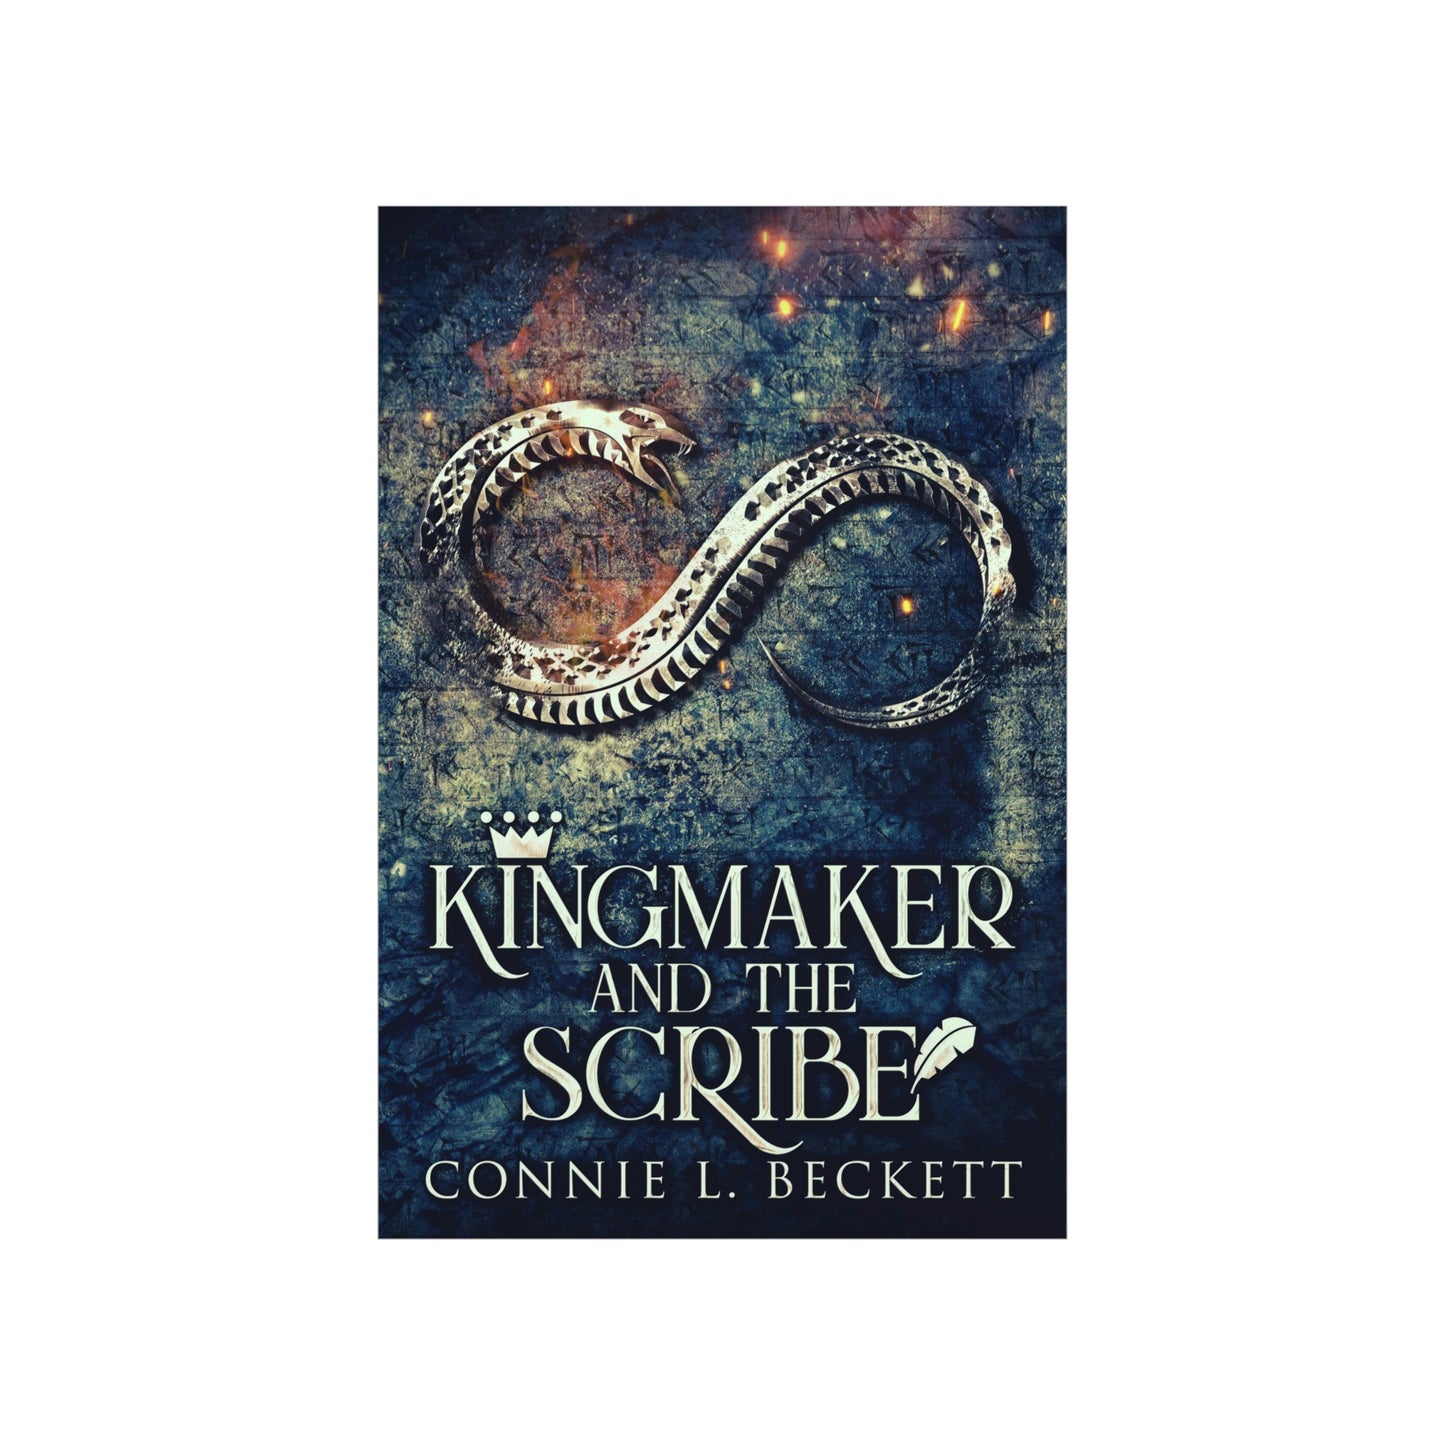 Kingmaker And The Scribe - Matte Poster